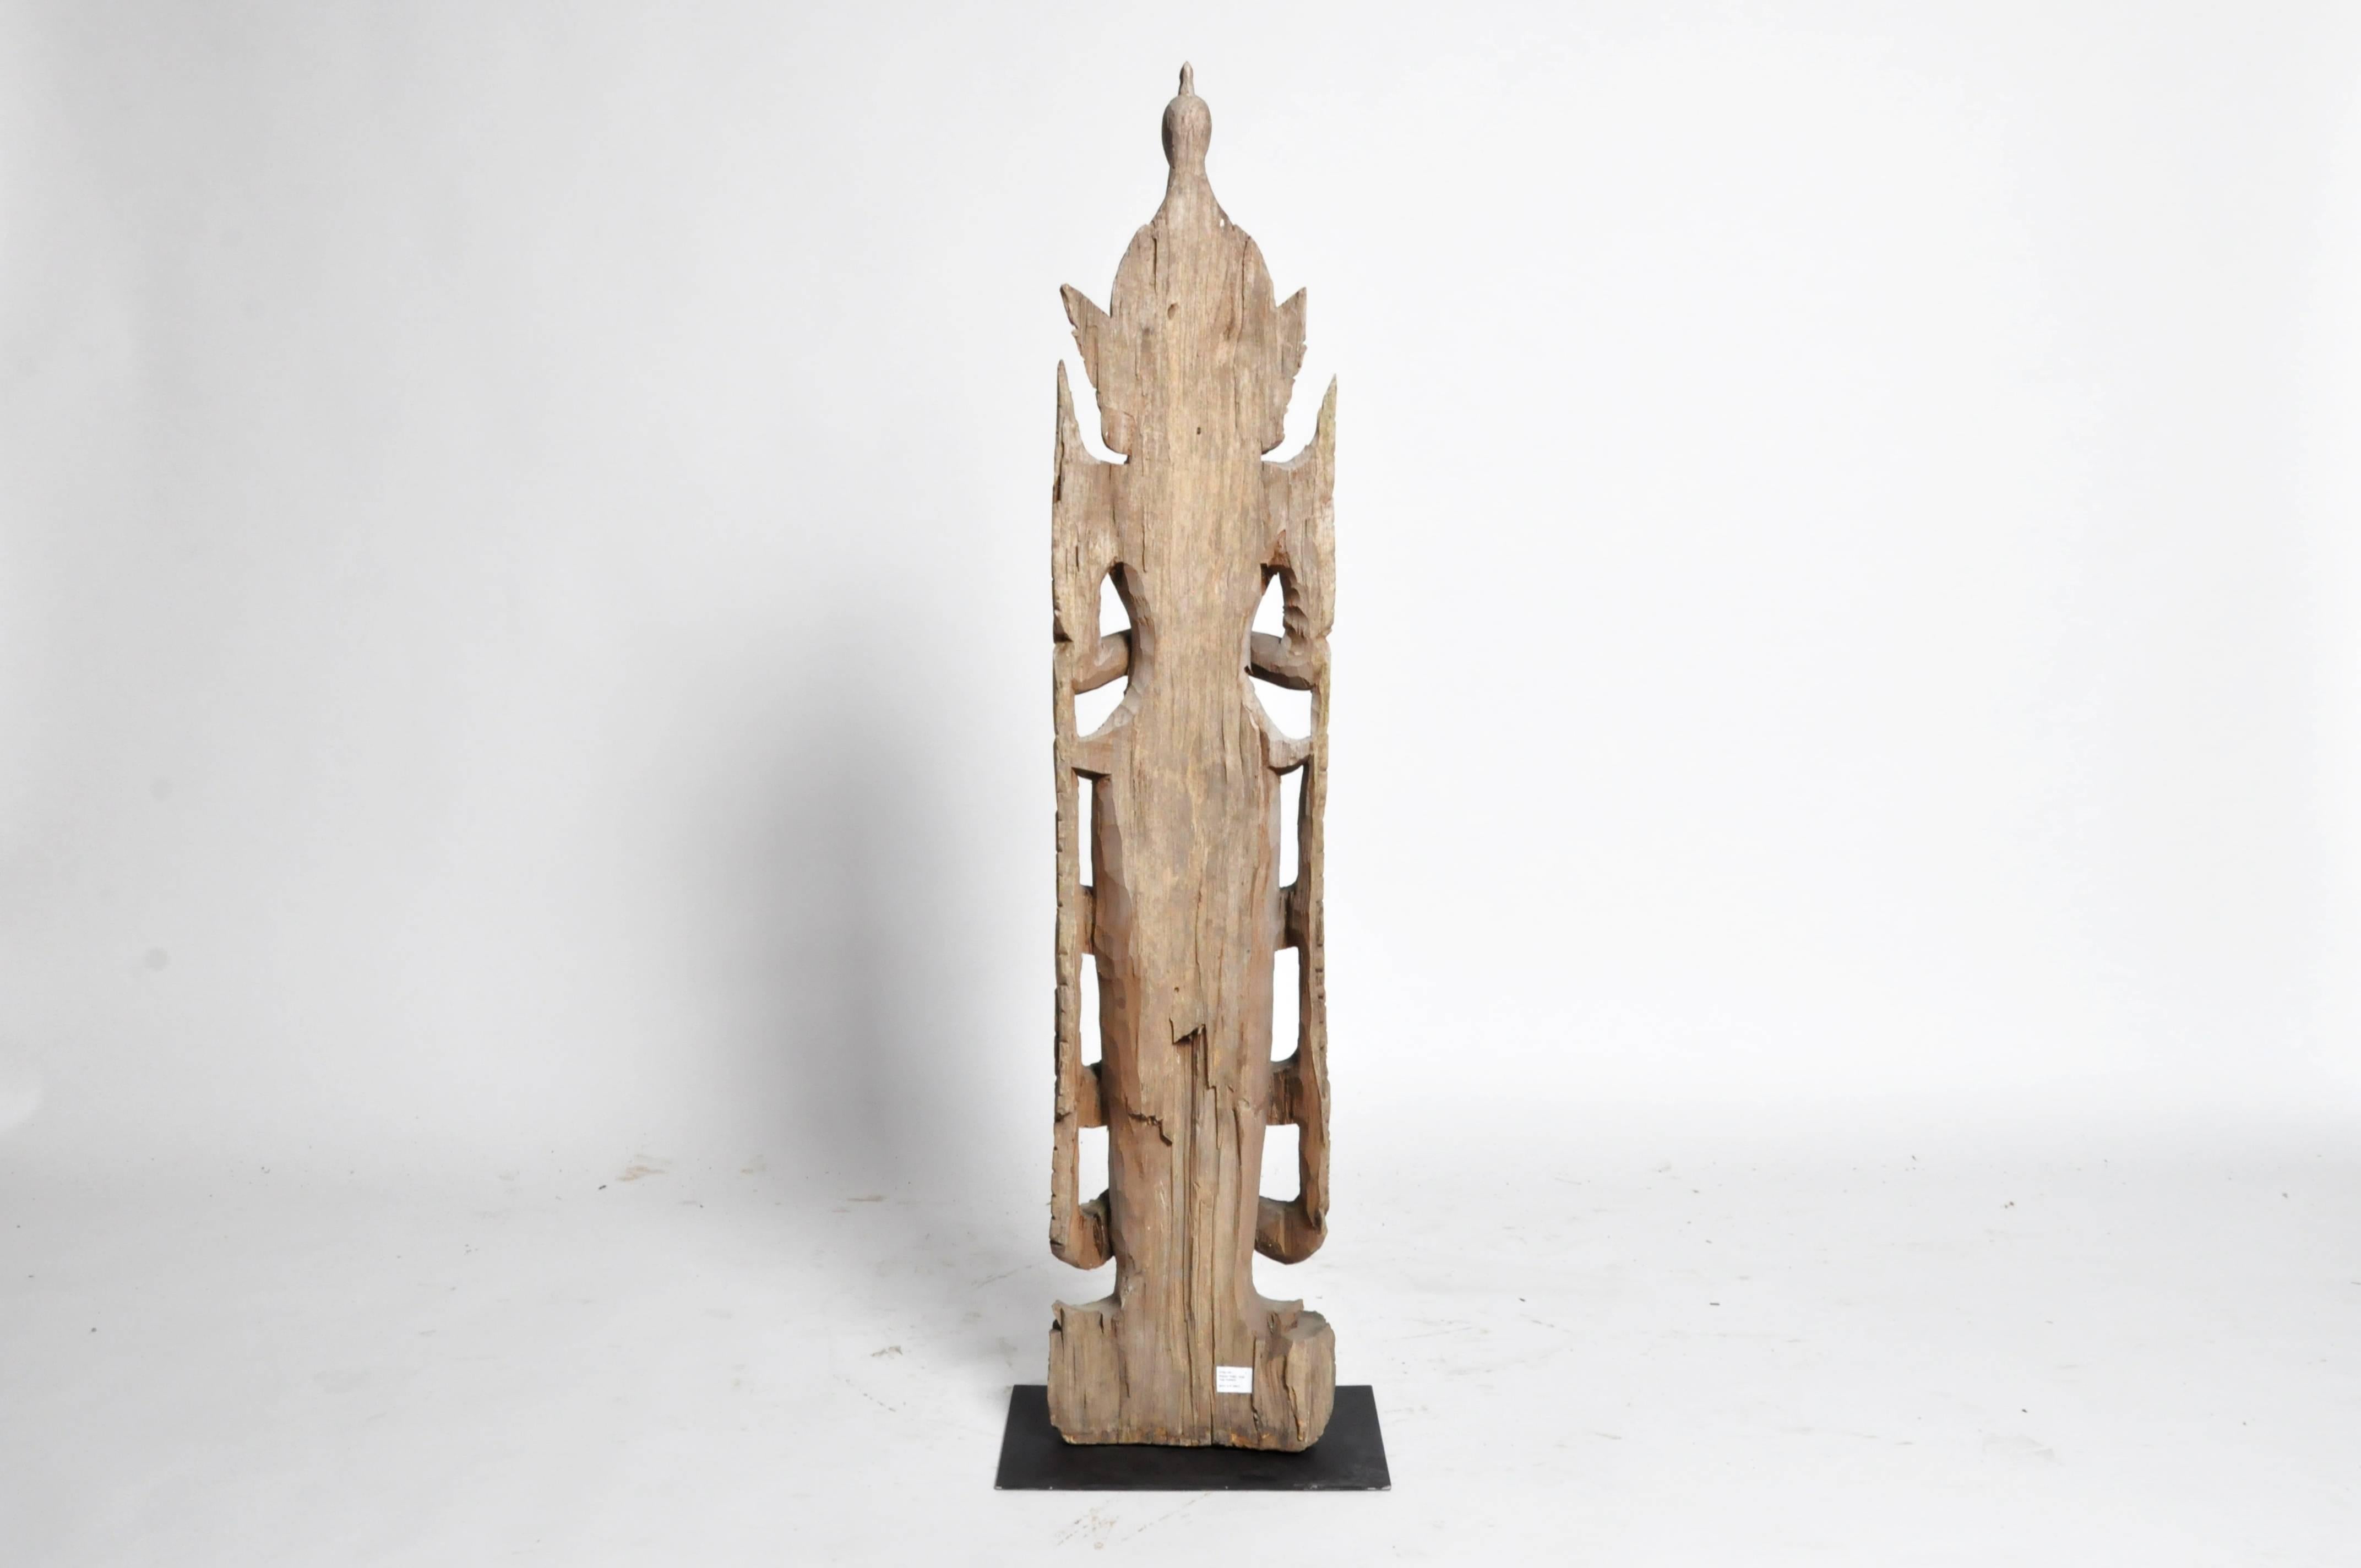 This beautiful wooden greeting angel sculpture is from Thailand and is made from teak wood.

Thai Buddhists, like members of many other faiths and cultures, believe that benign heavenly beings (angels) inhabit the heavens and intercede in the